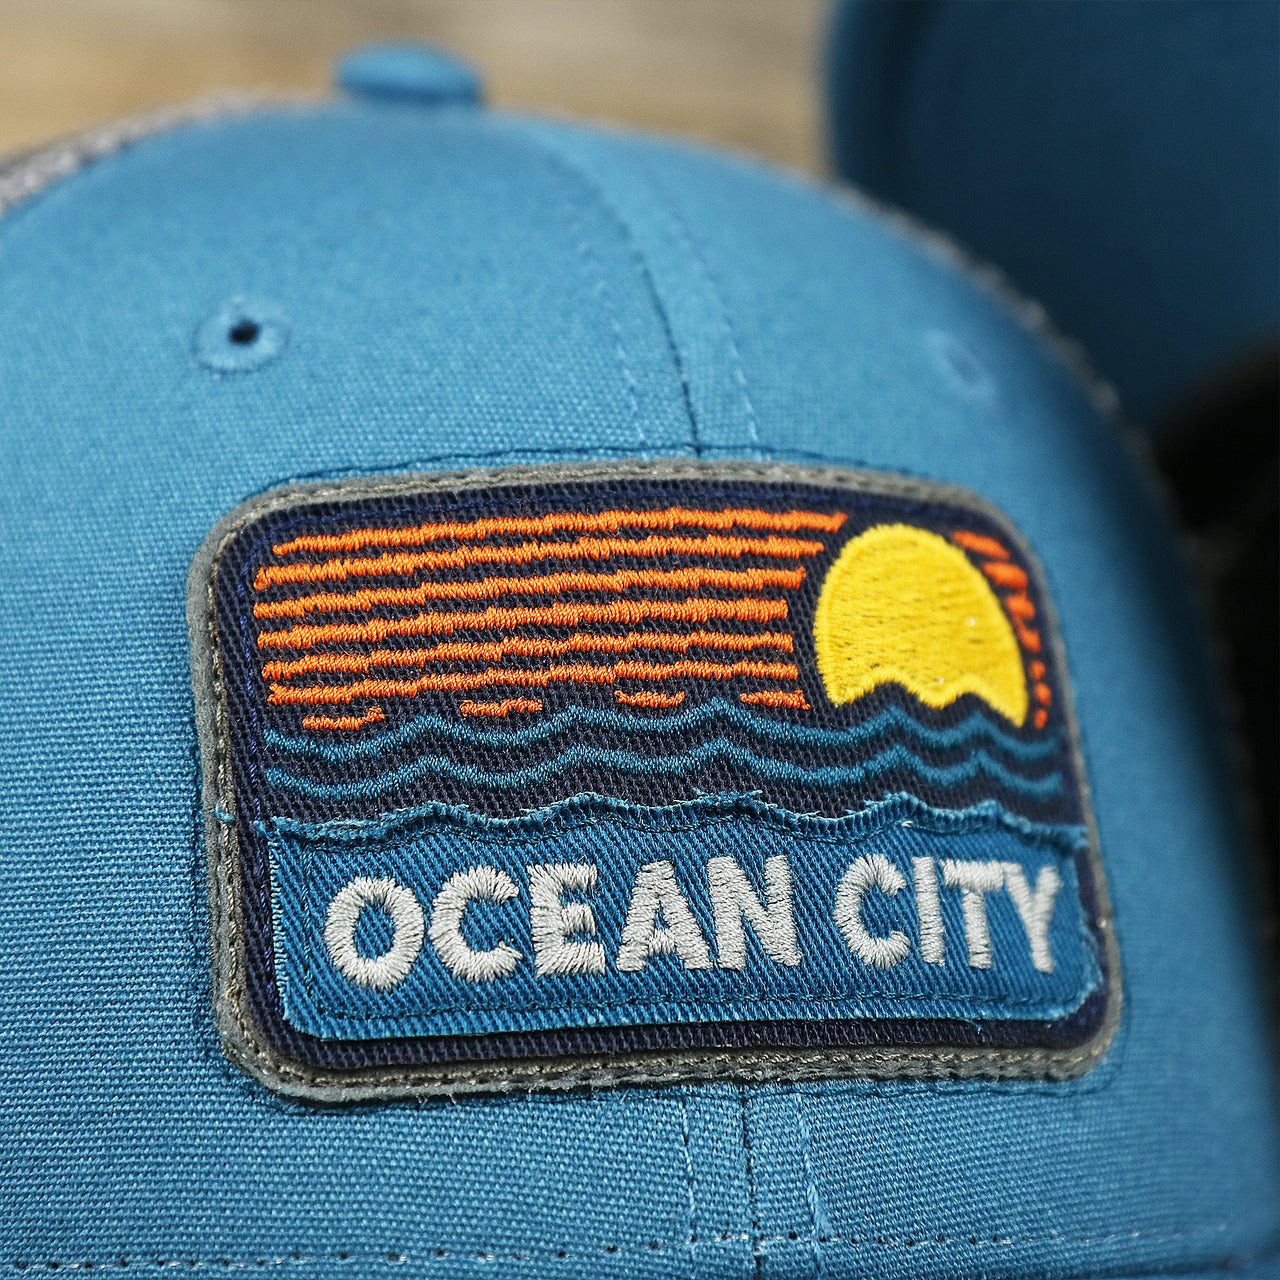 The Ocean City Sunset Patch on the Youth New Jersey Ocean City Sunset Mesh Back Trucker Hat | Marine Blue And Dark Gray Mesh Youth Trucker Hat